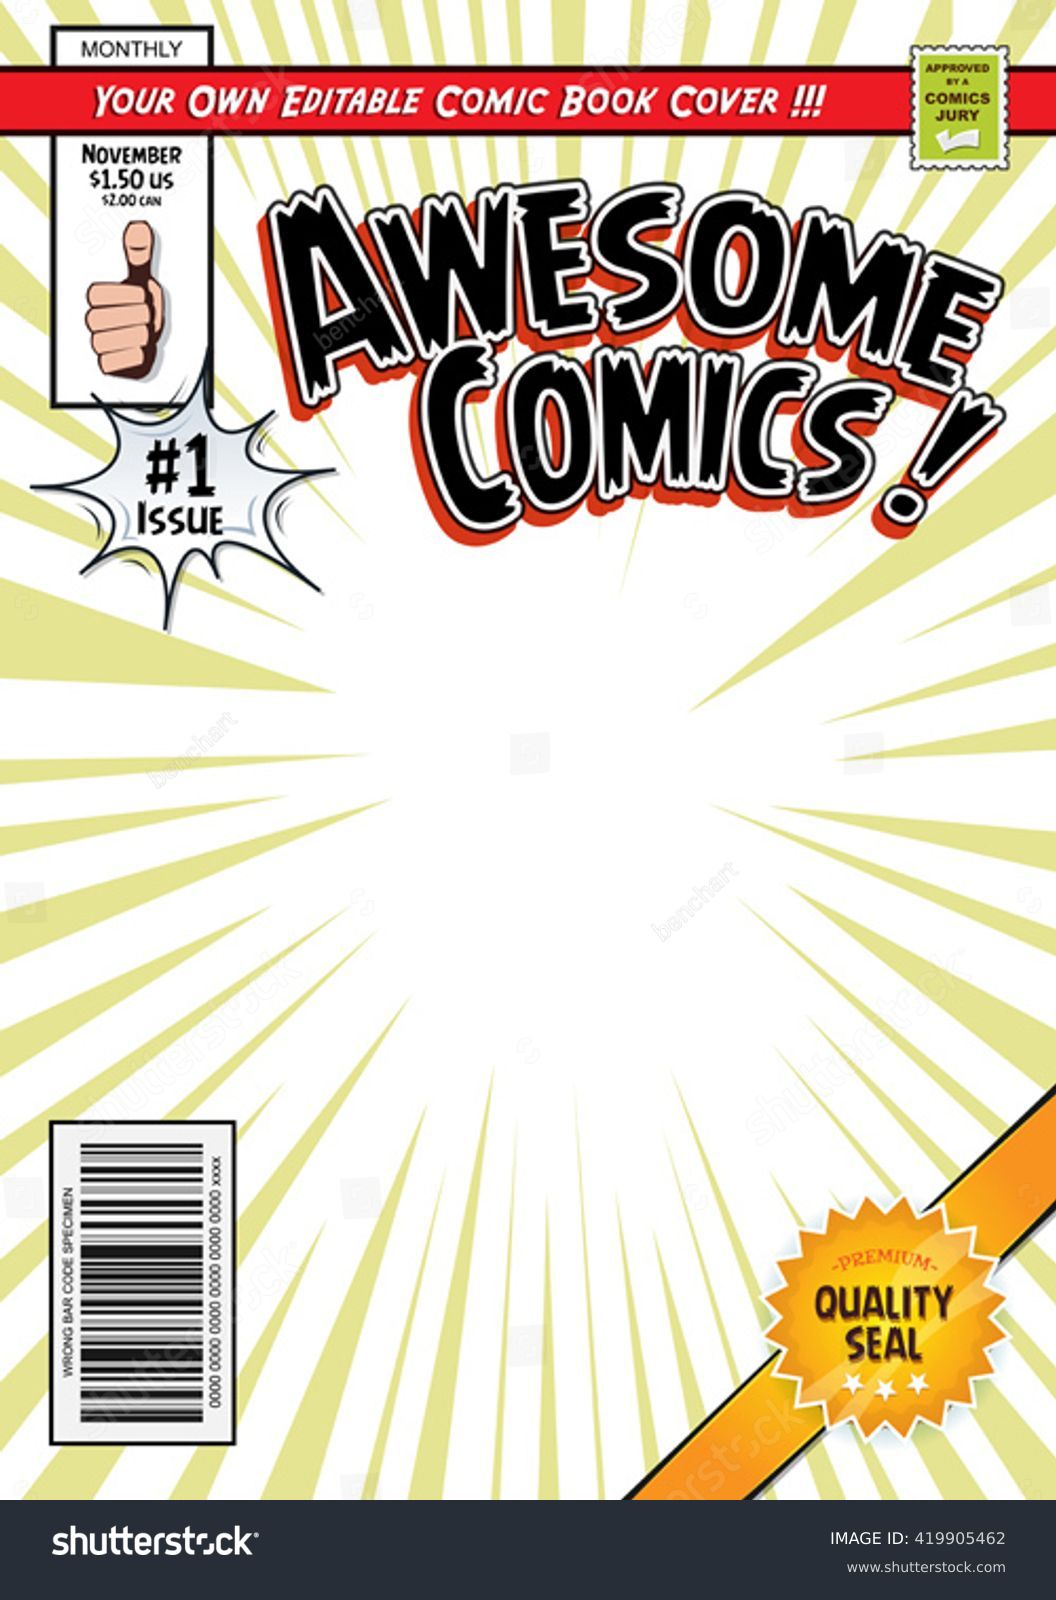 comic-book-cover-template-illustration-of-a-cartoon-editable-comic-book-cover-template-with